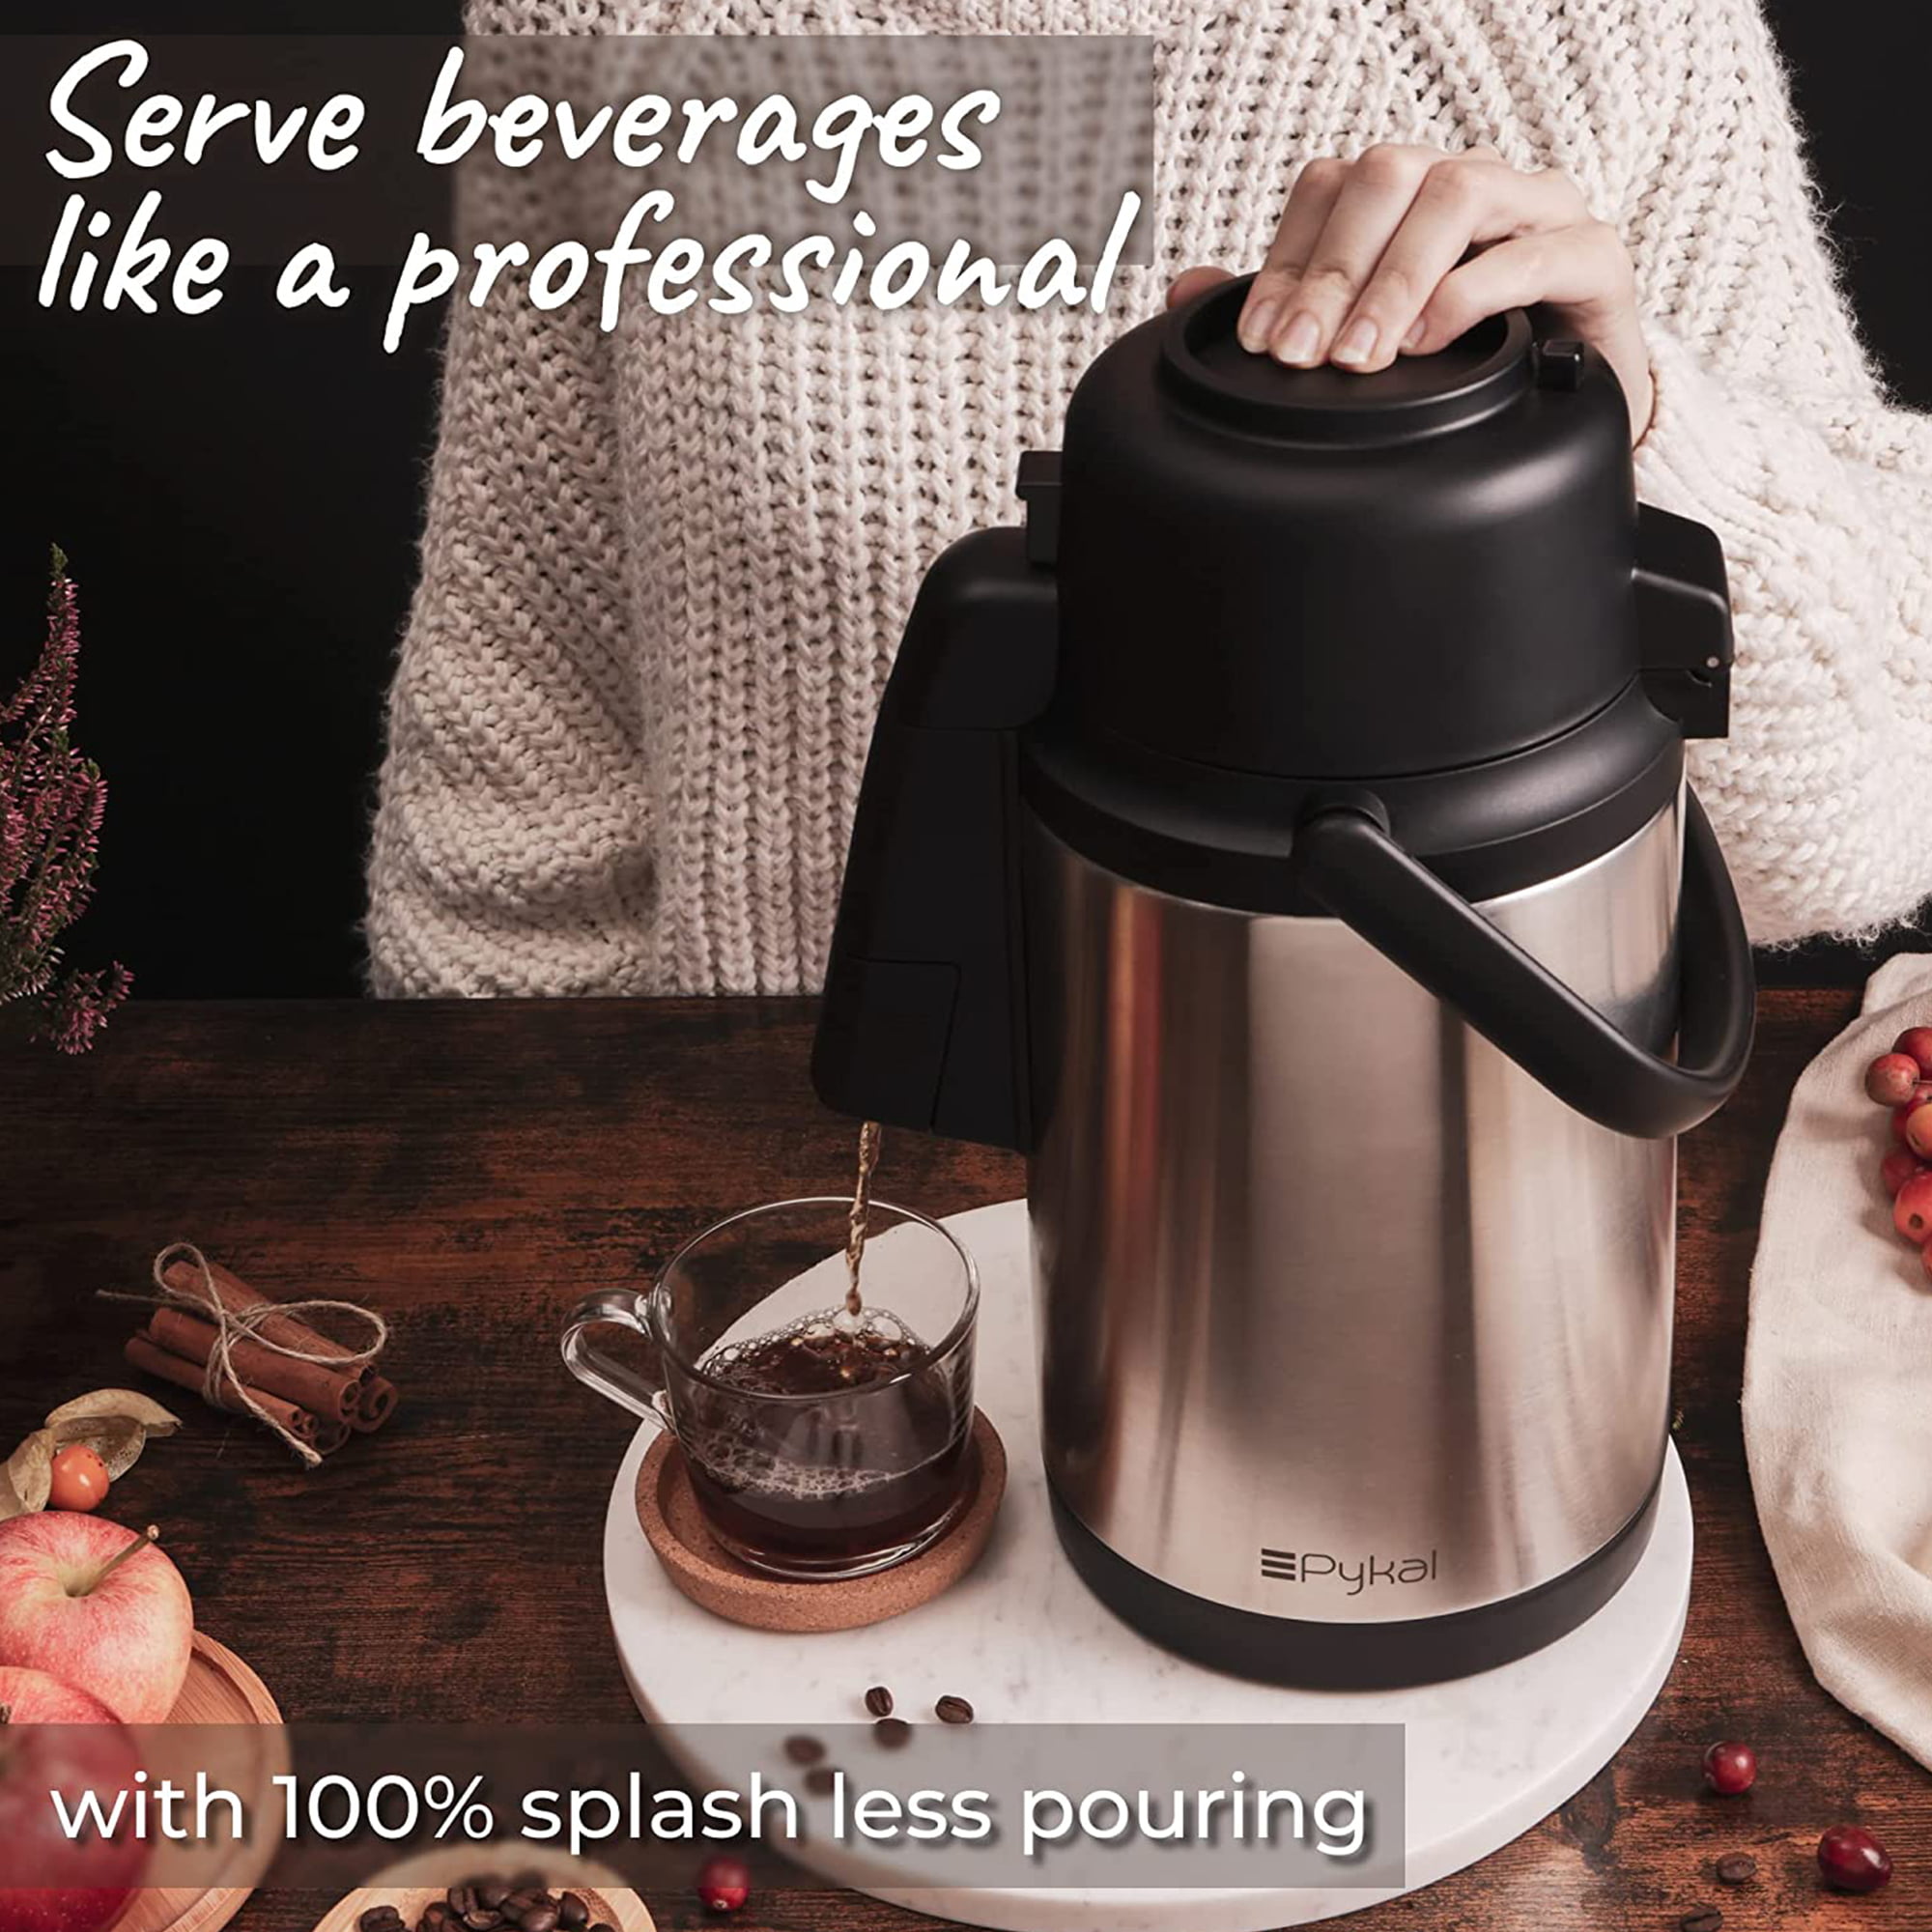 Pykal 68-oz Thermal Coffee Carafe Insulated Drink Dispenser with Free Brush, Size: 68oz, Silver